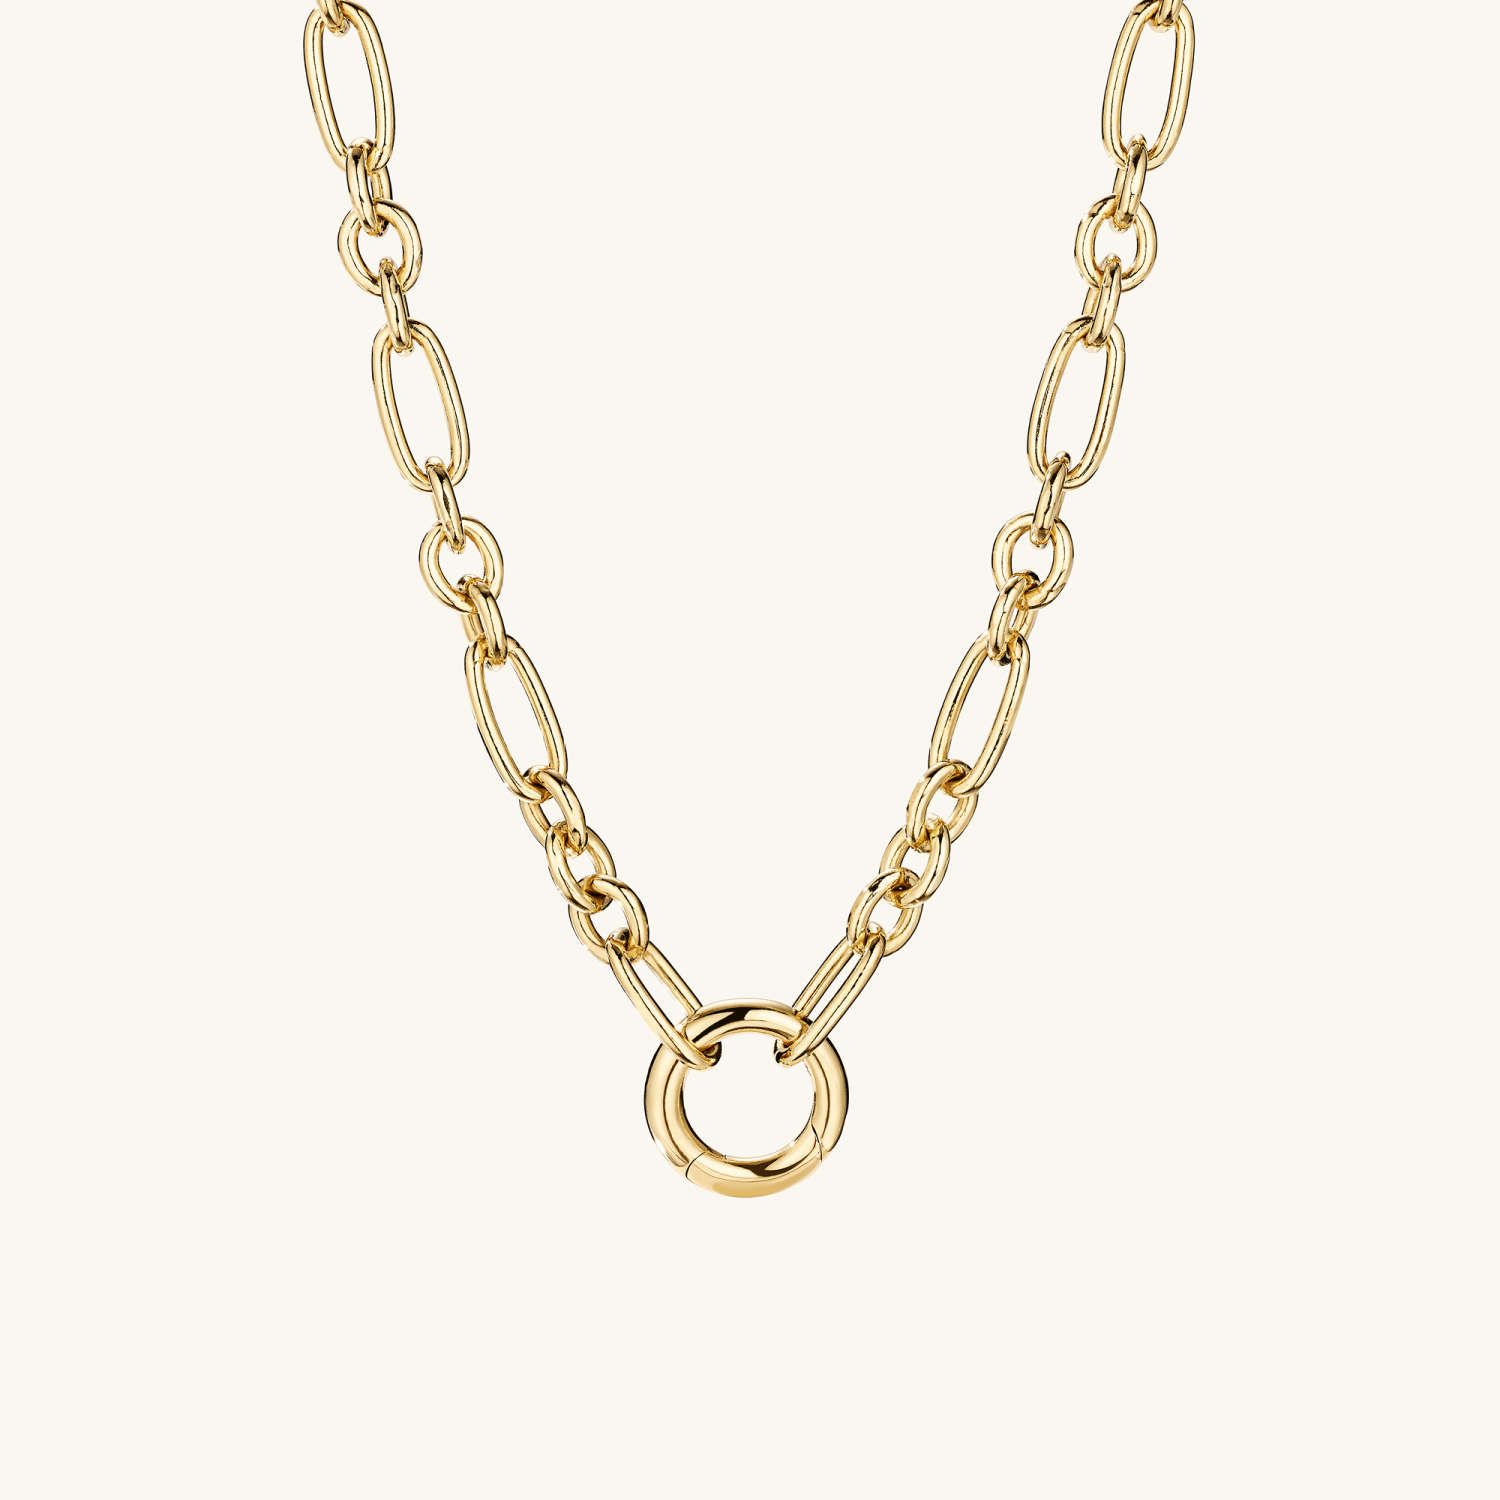 Mixed Link Chain Charm Necklace